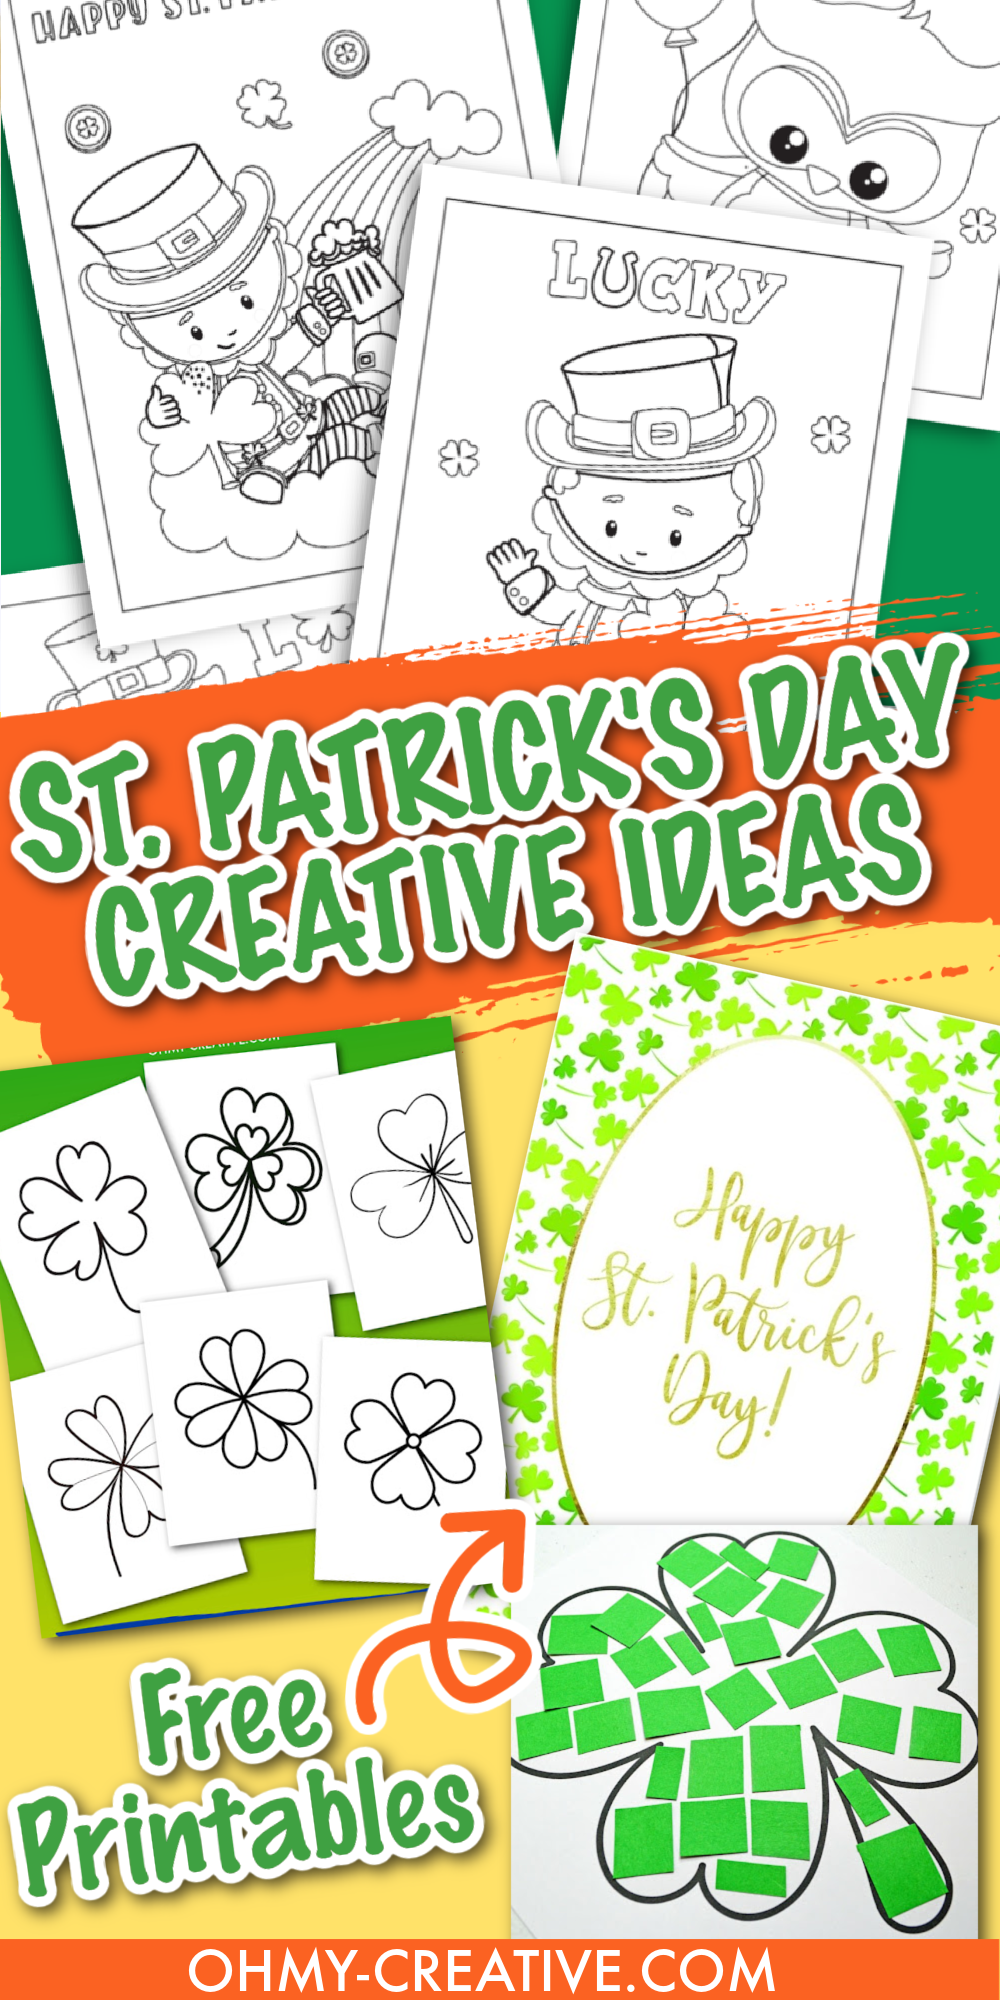 A pin image collage of St. Patrick's Day ideas including, printables, crafts, recipes to celebrate the holiday.